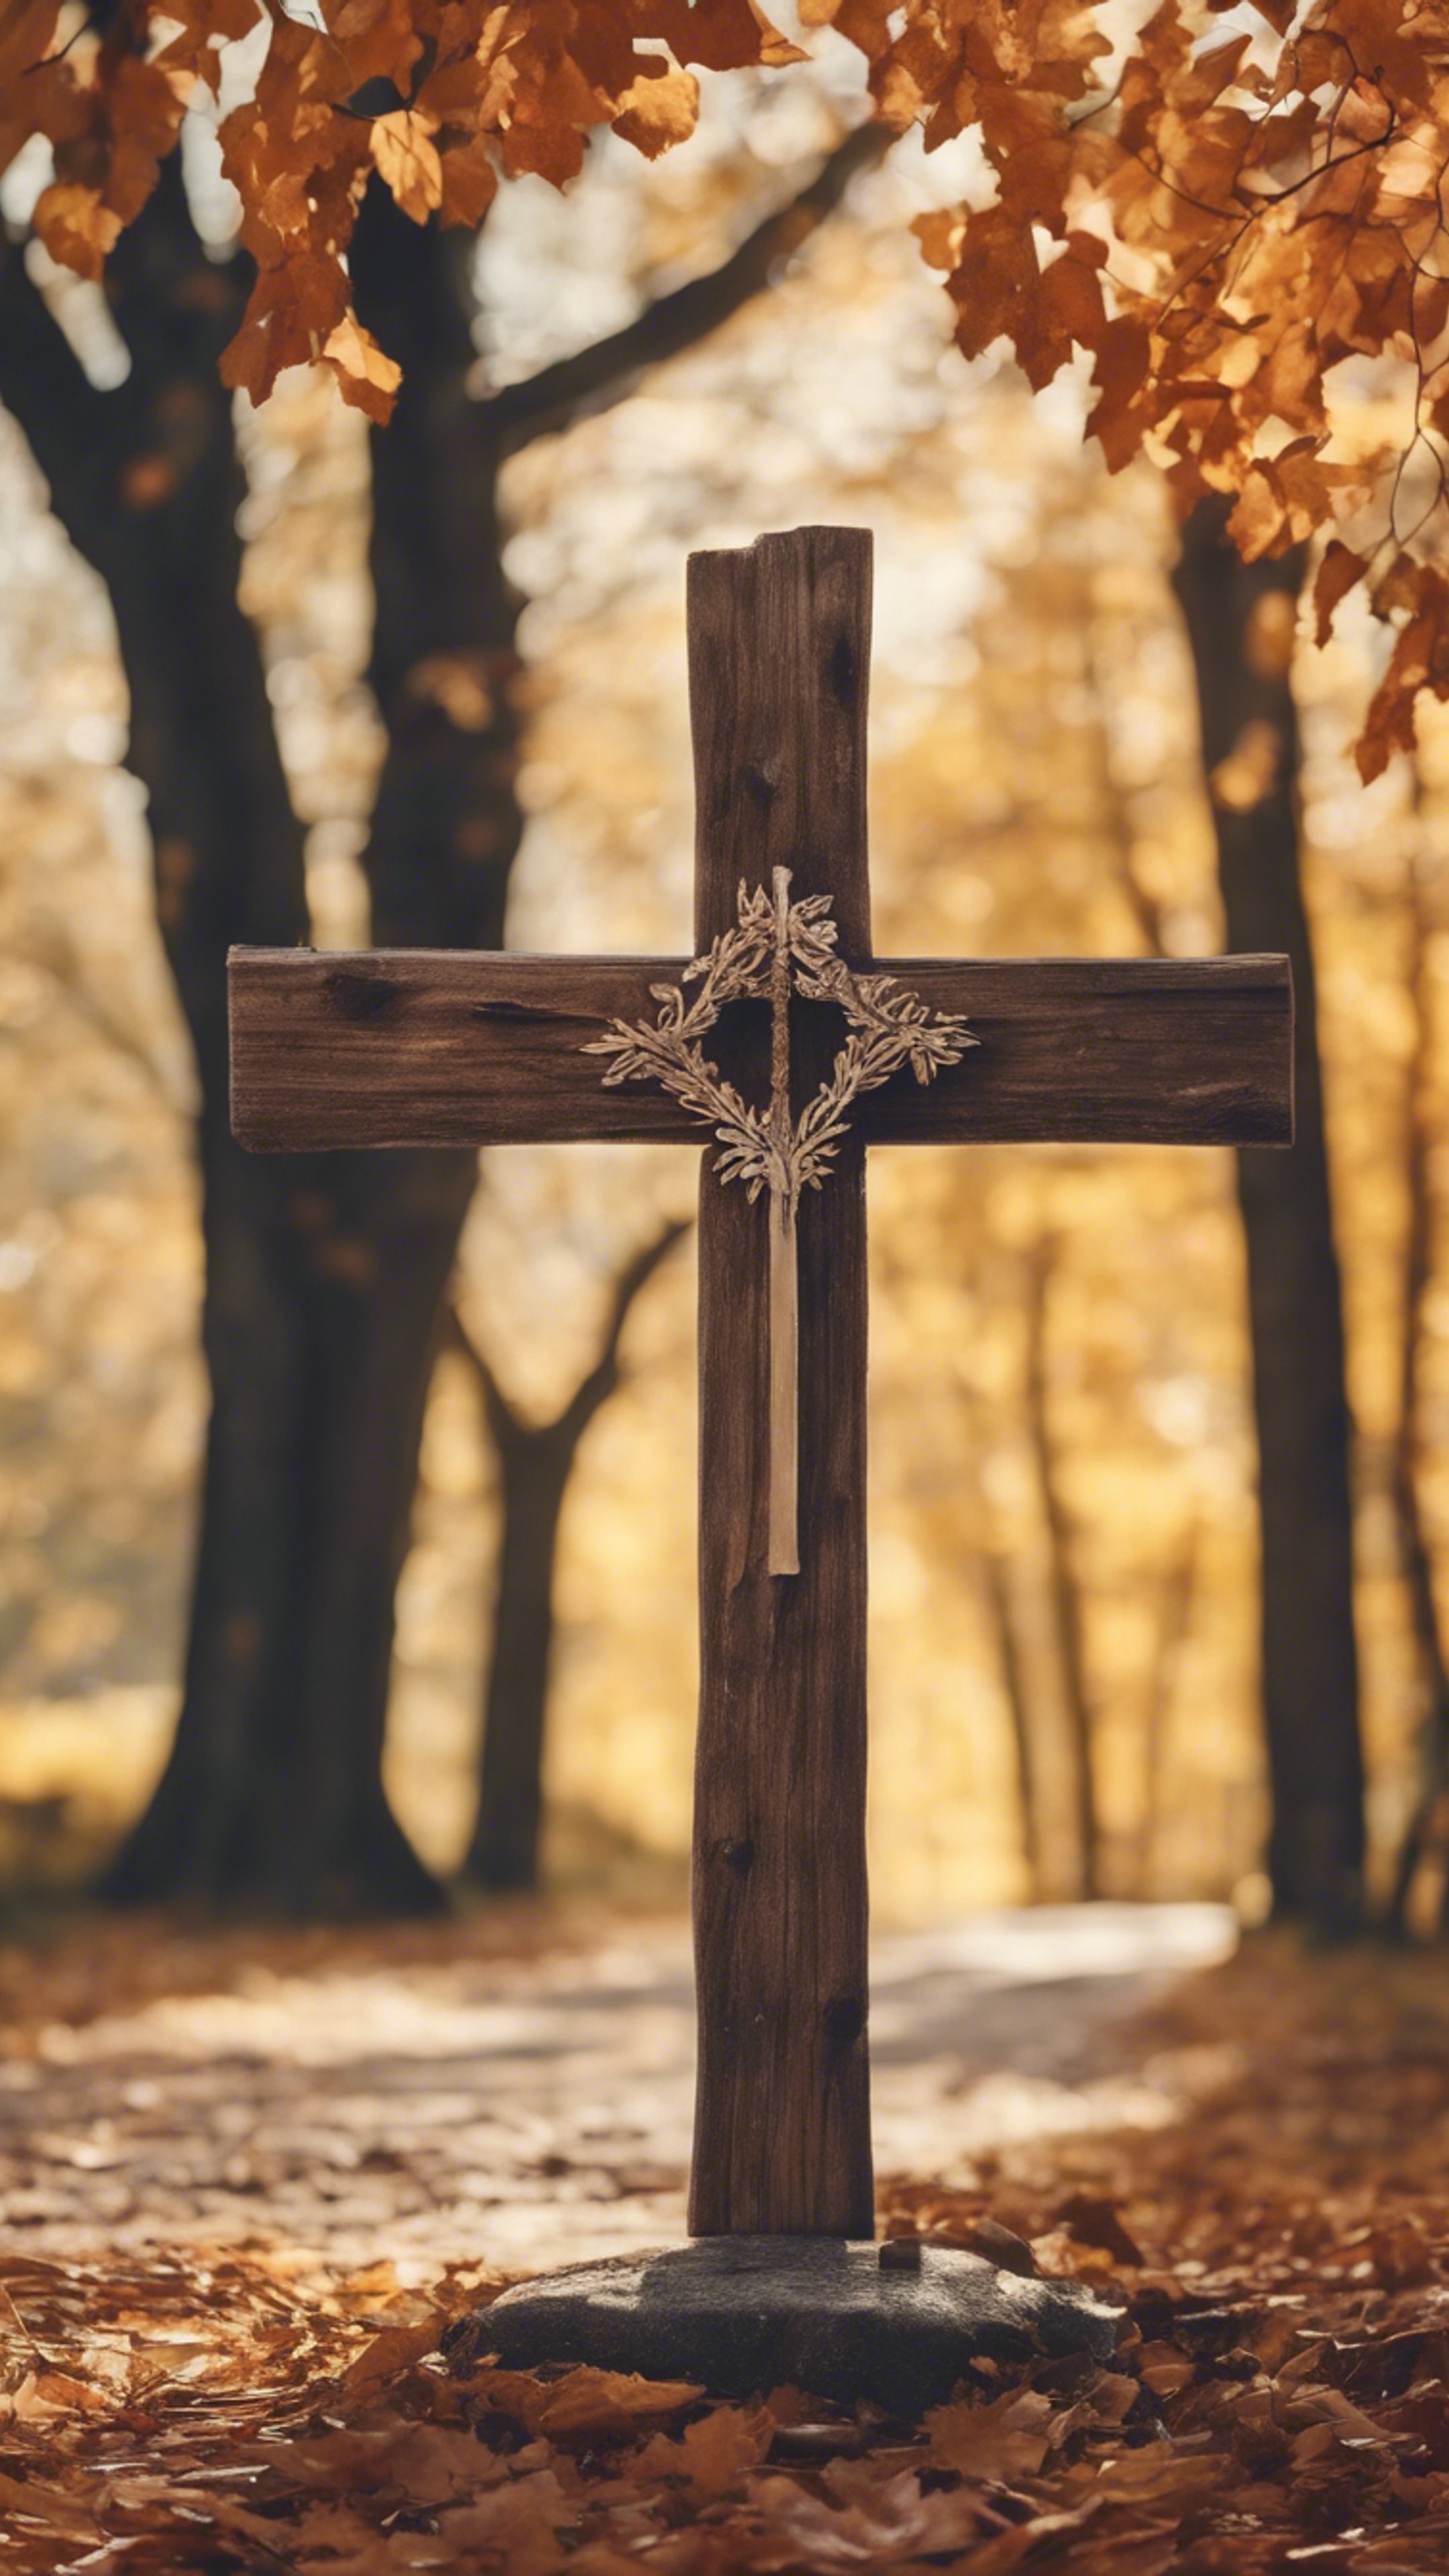 A rustic wooden cross standing by a country road, surrounded by autumn leaves. Taustakuva[8ef87987617941c481d6]